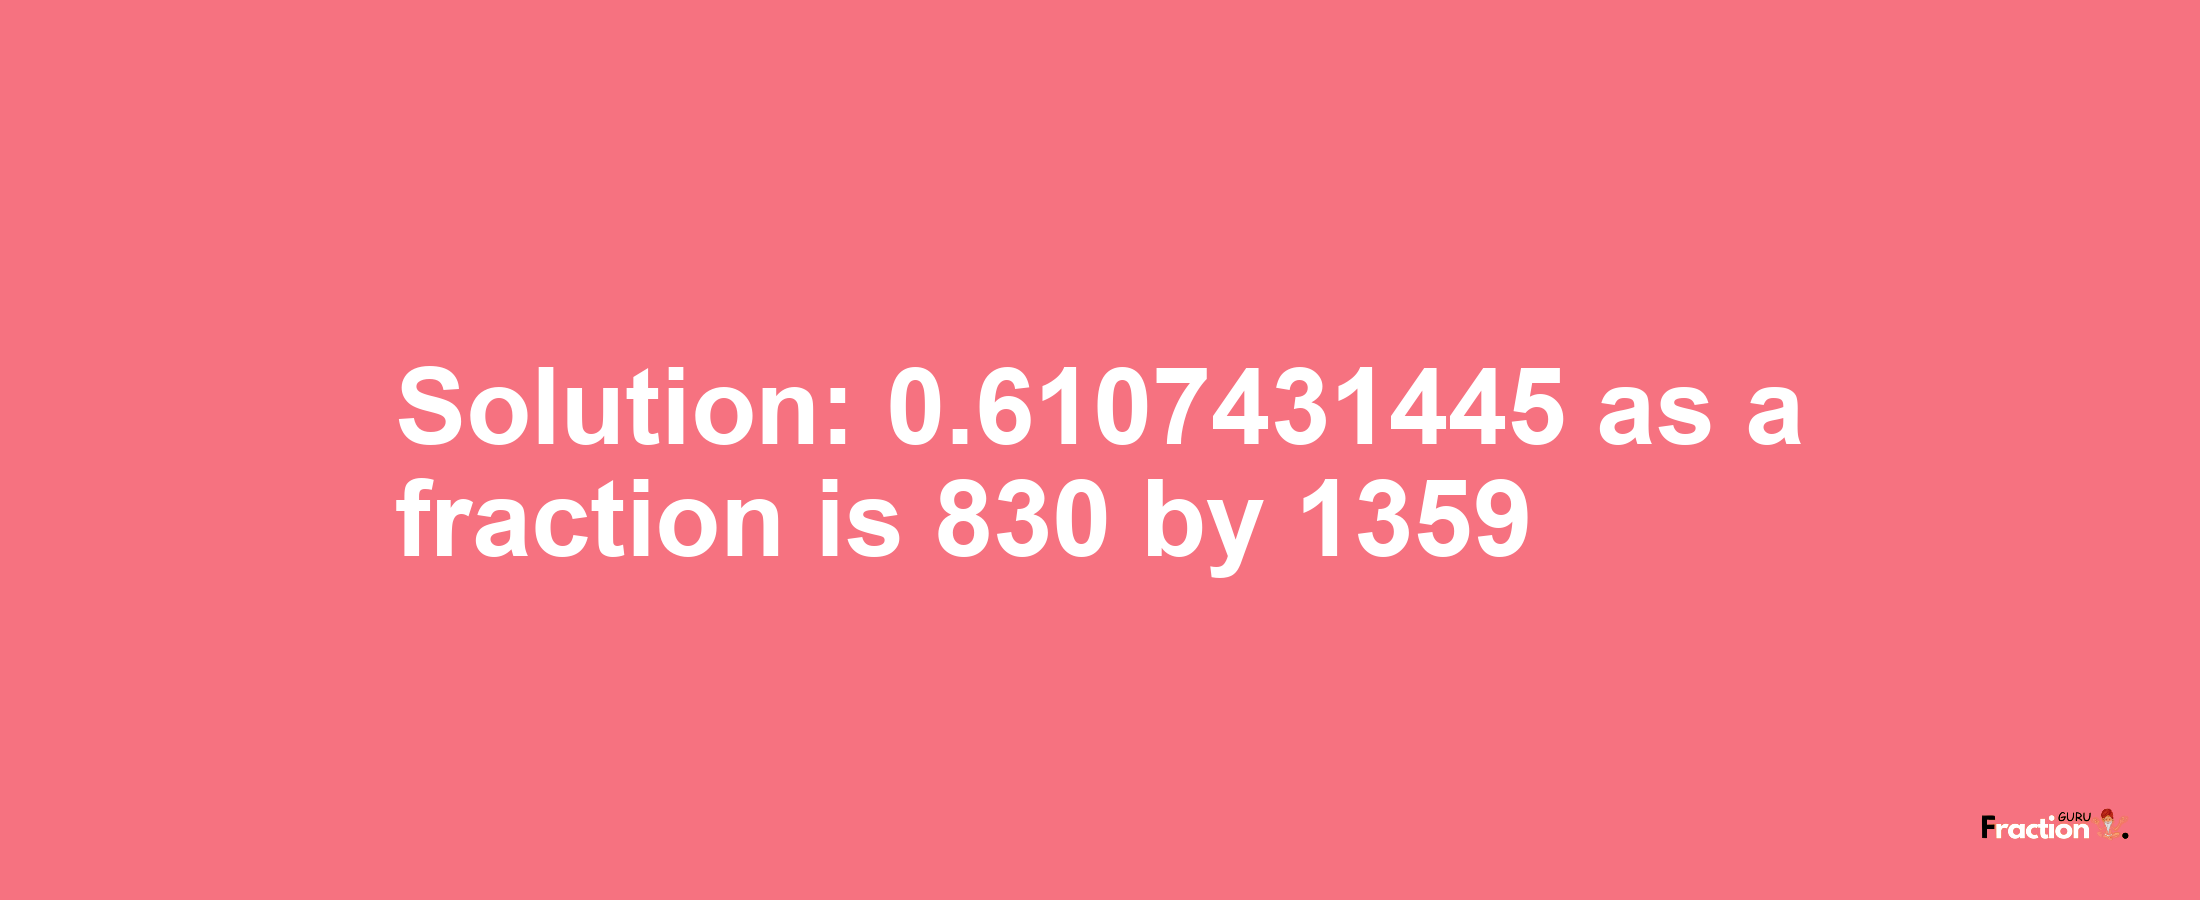 Solution:0.6107431445 as a fraction is 830/1359